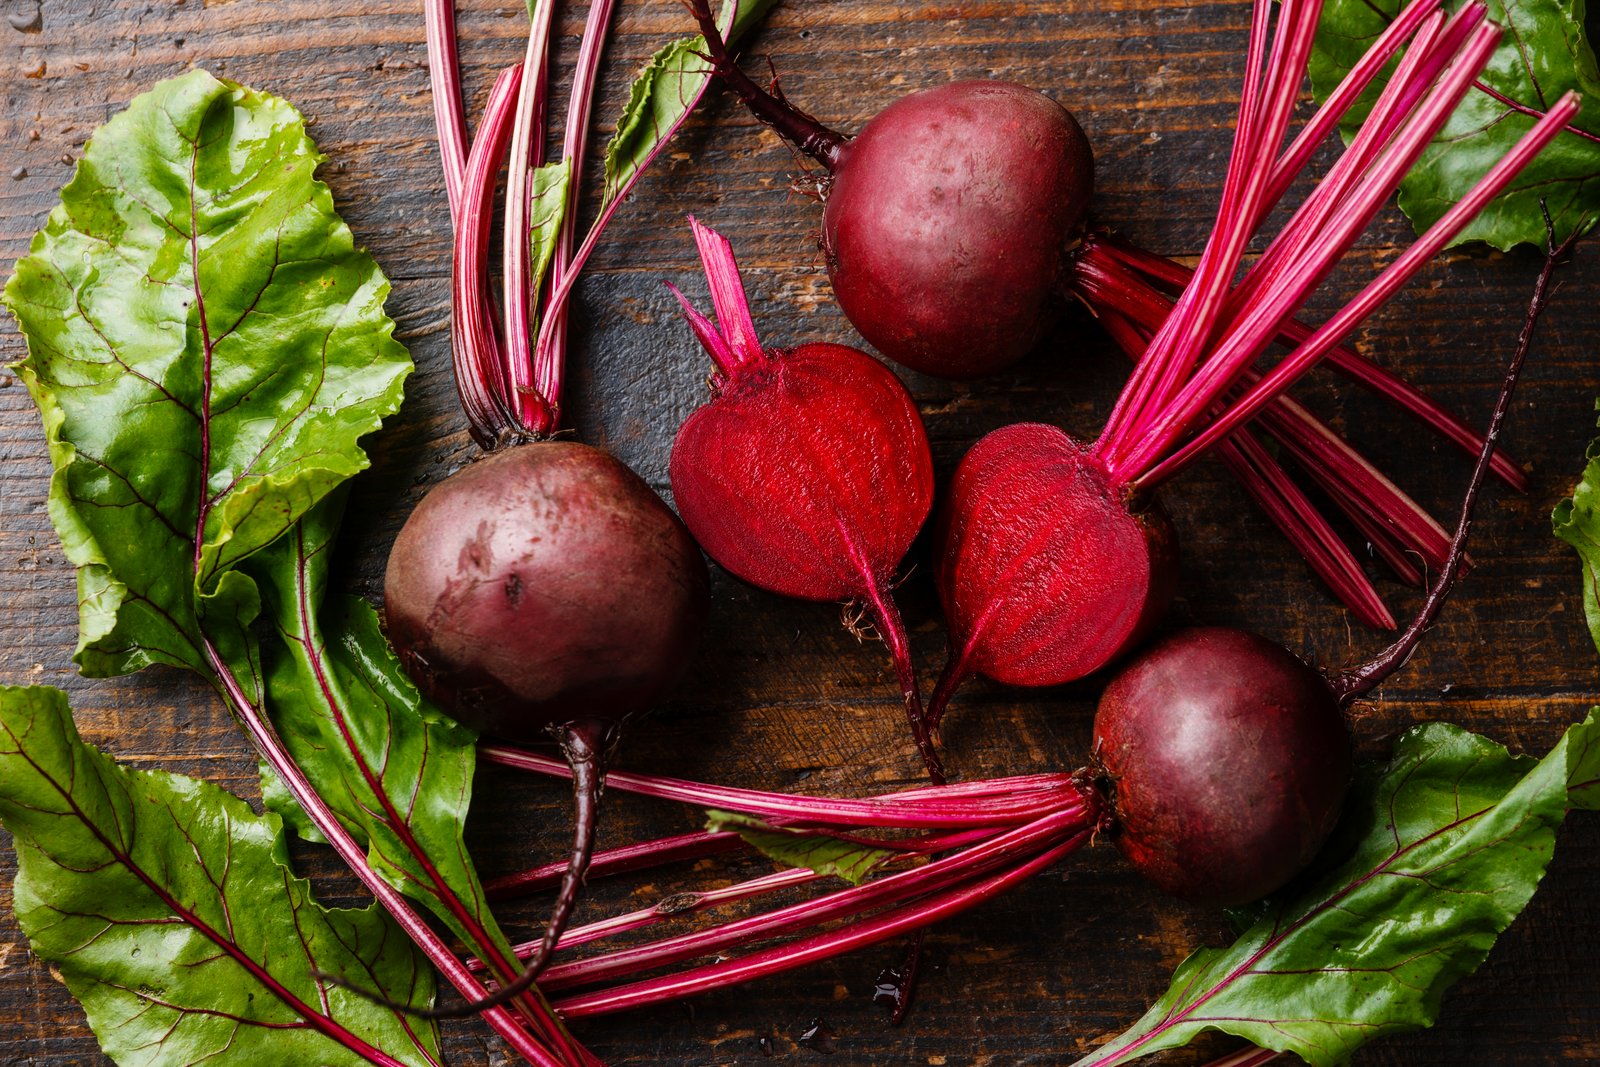 Red beets with stems and greens arranged on a cutting board